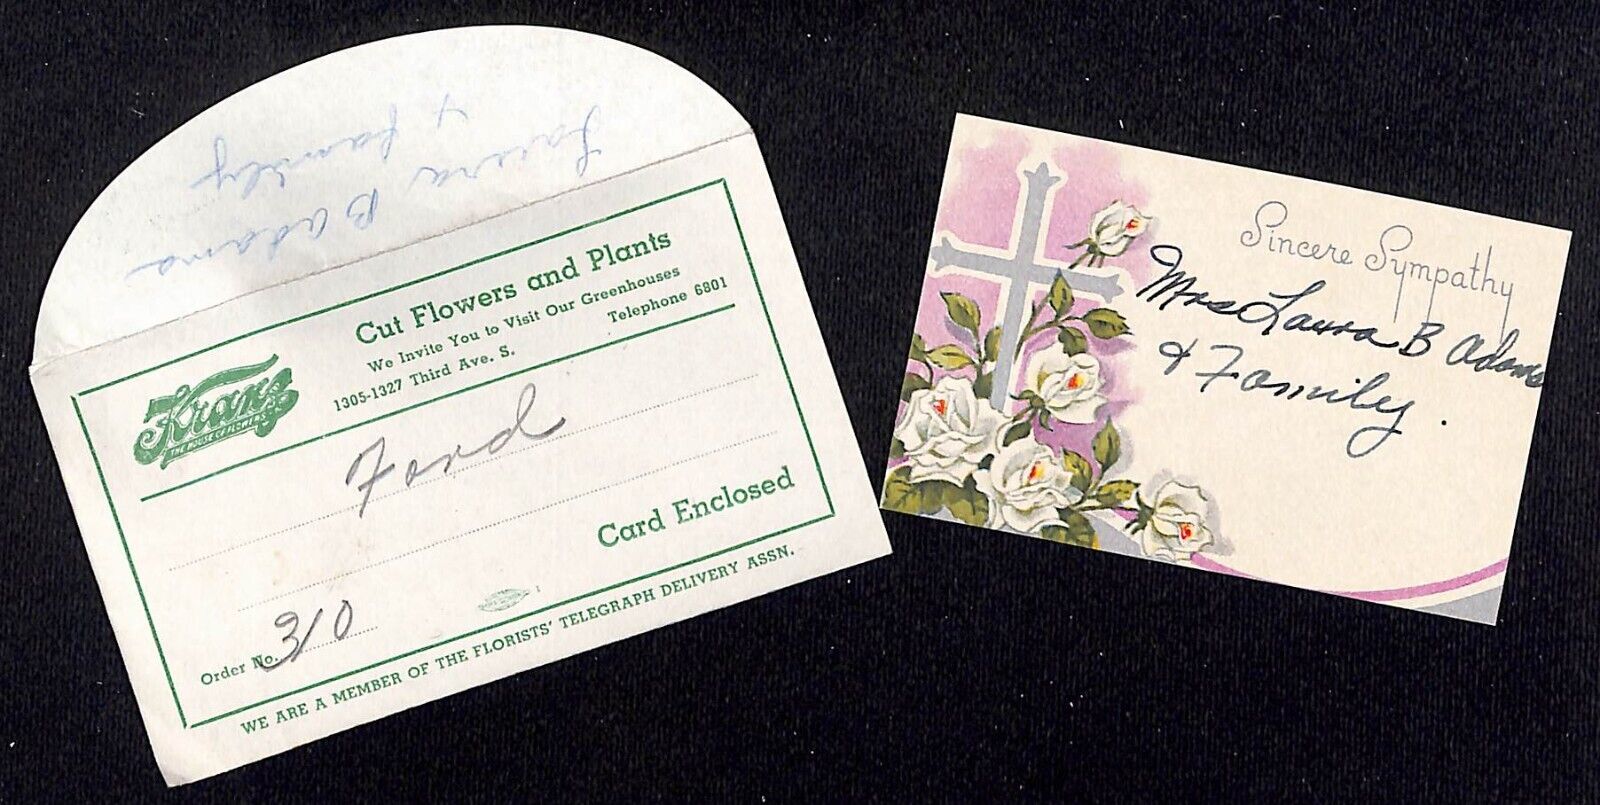 Kranz House of Flowers Great Falls, MT Delivery Card w/ Envelope c1940's-50's